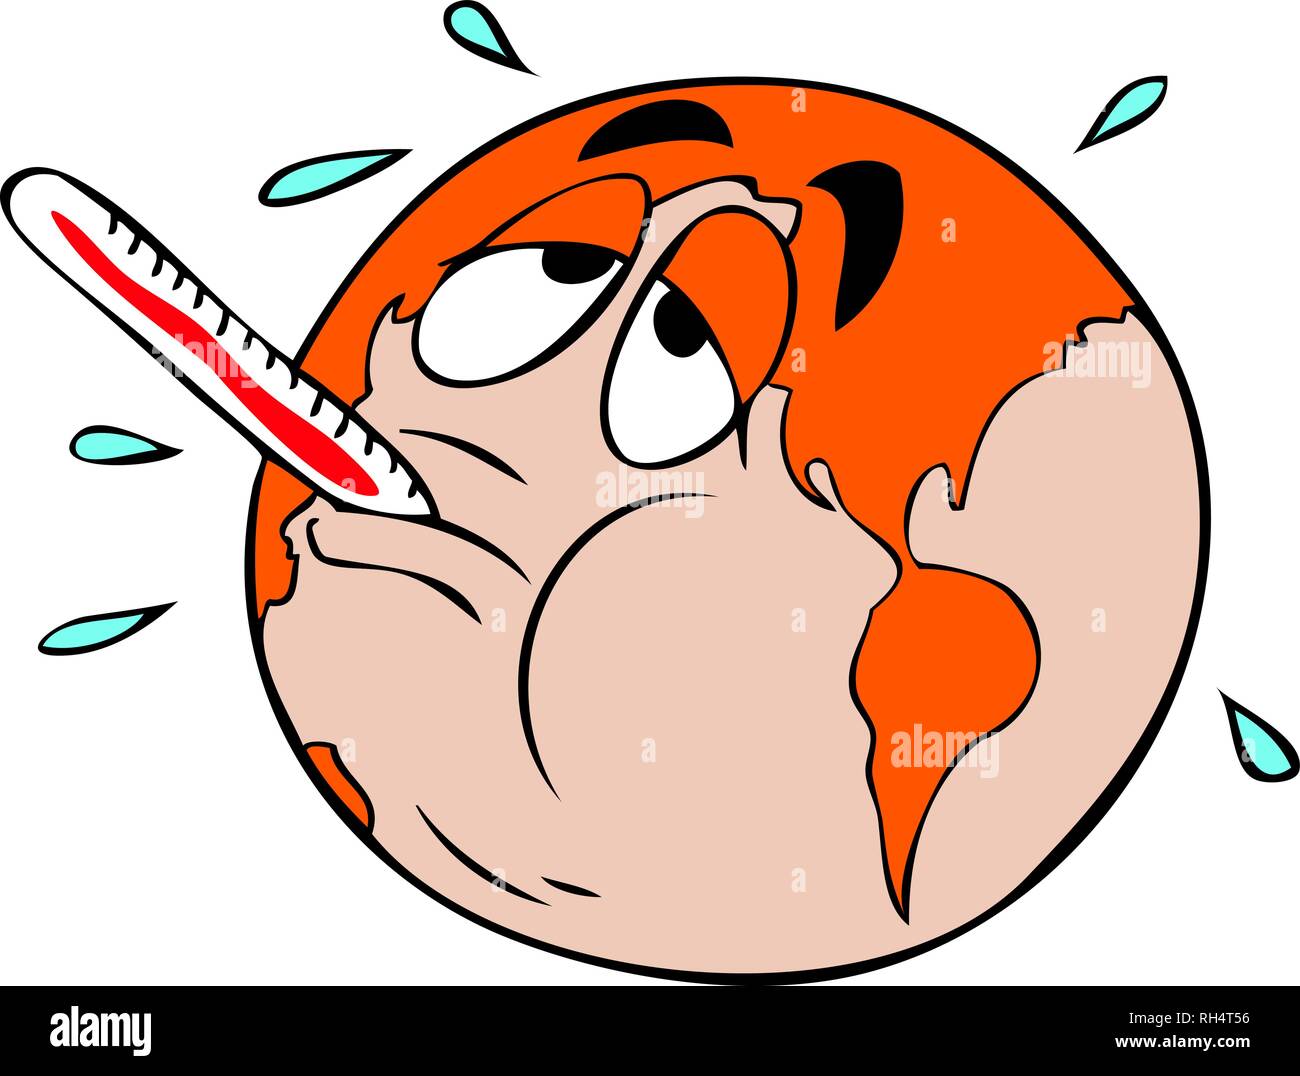 Cartoon Illustration of the earth threatened by global warming. Stock Vector